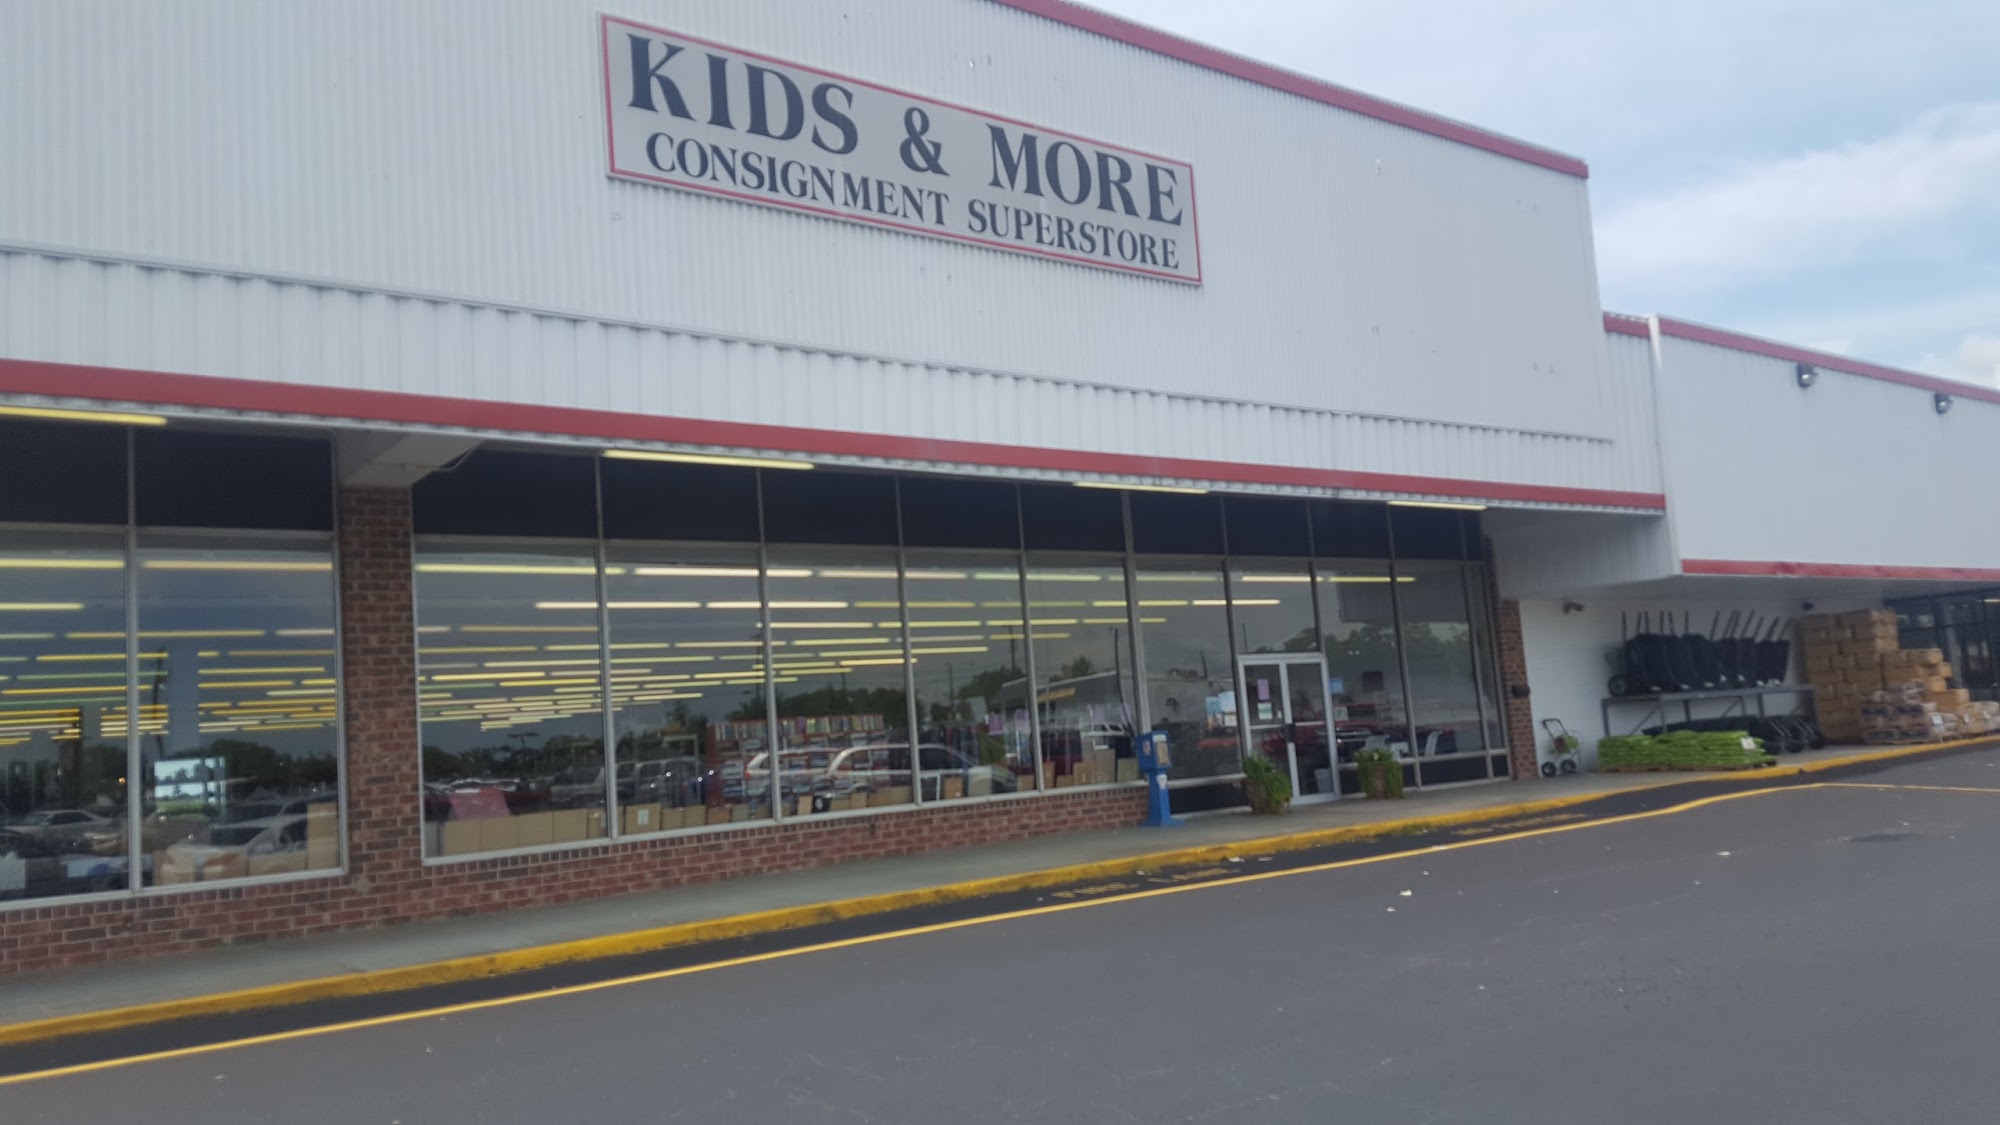 Kids & More Family Consignment Store